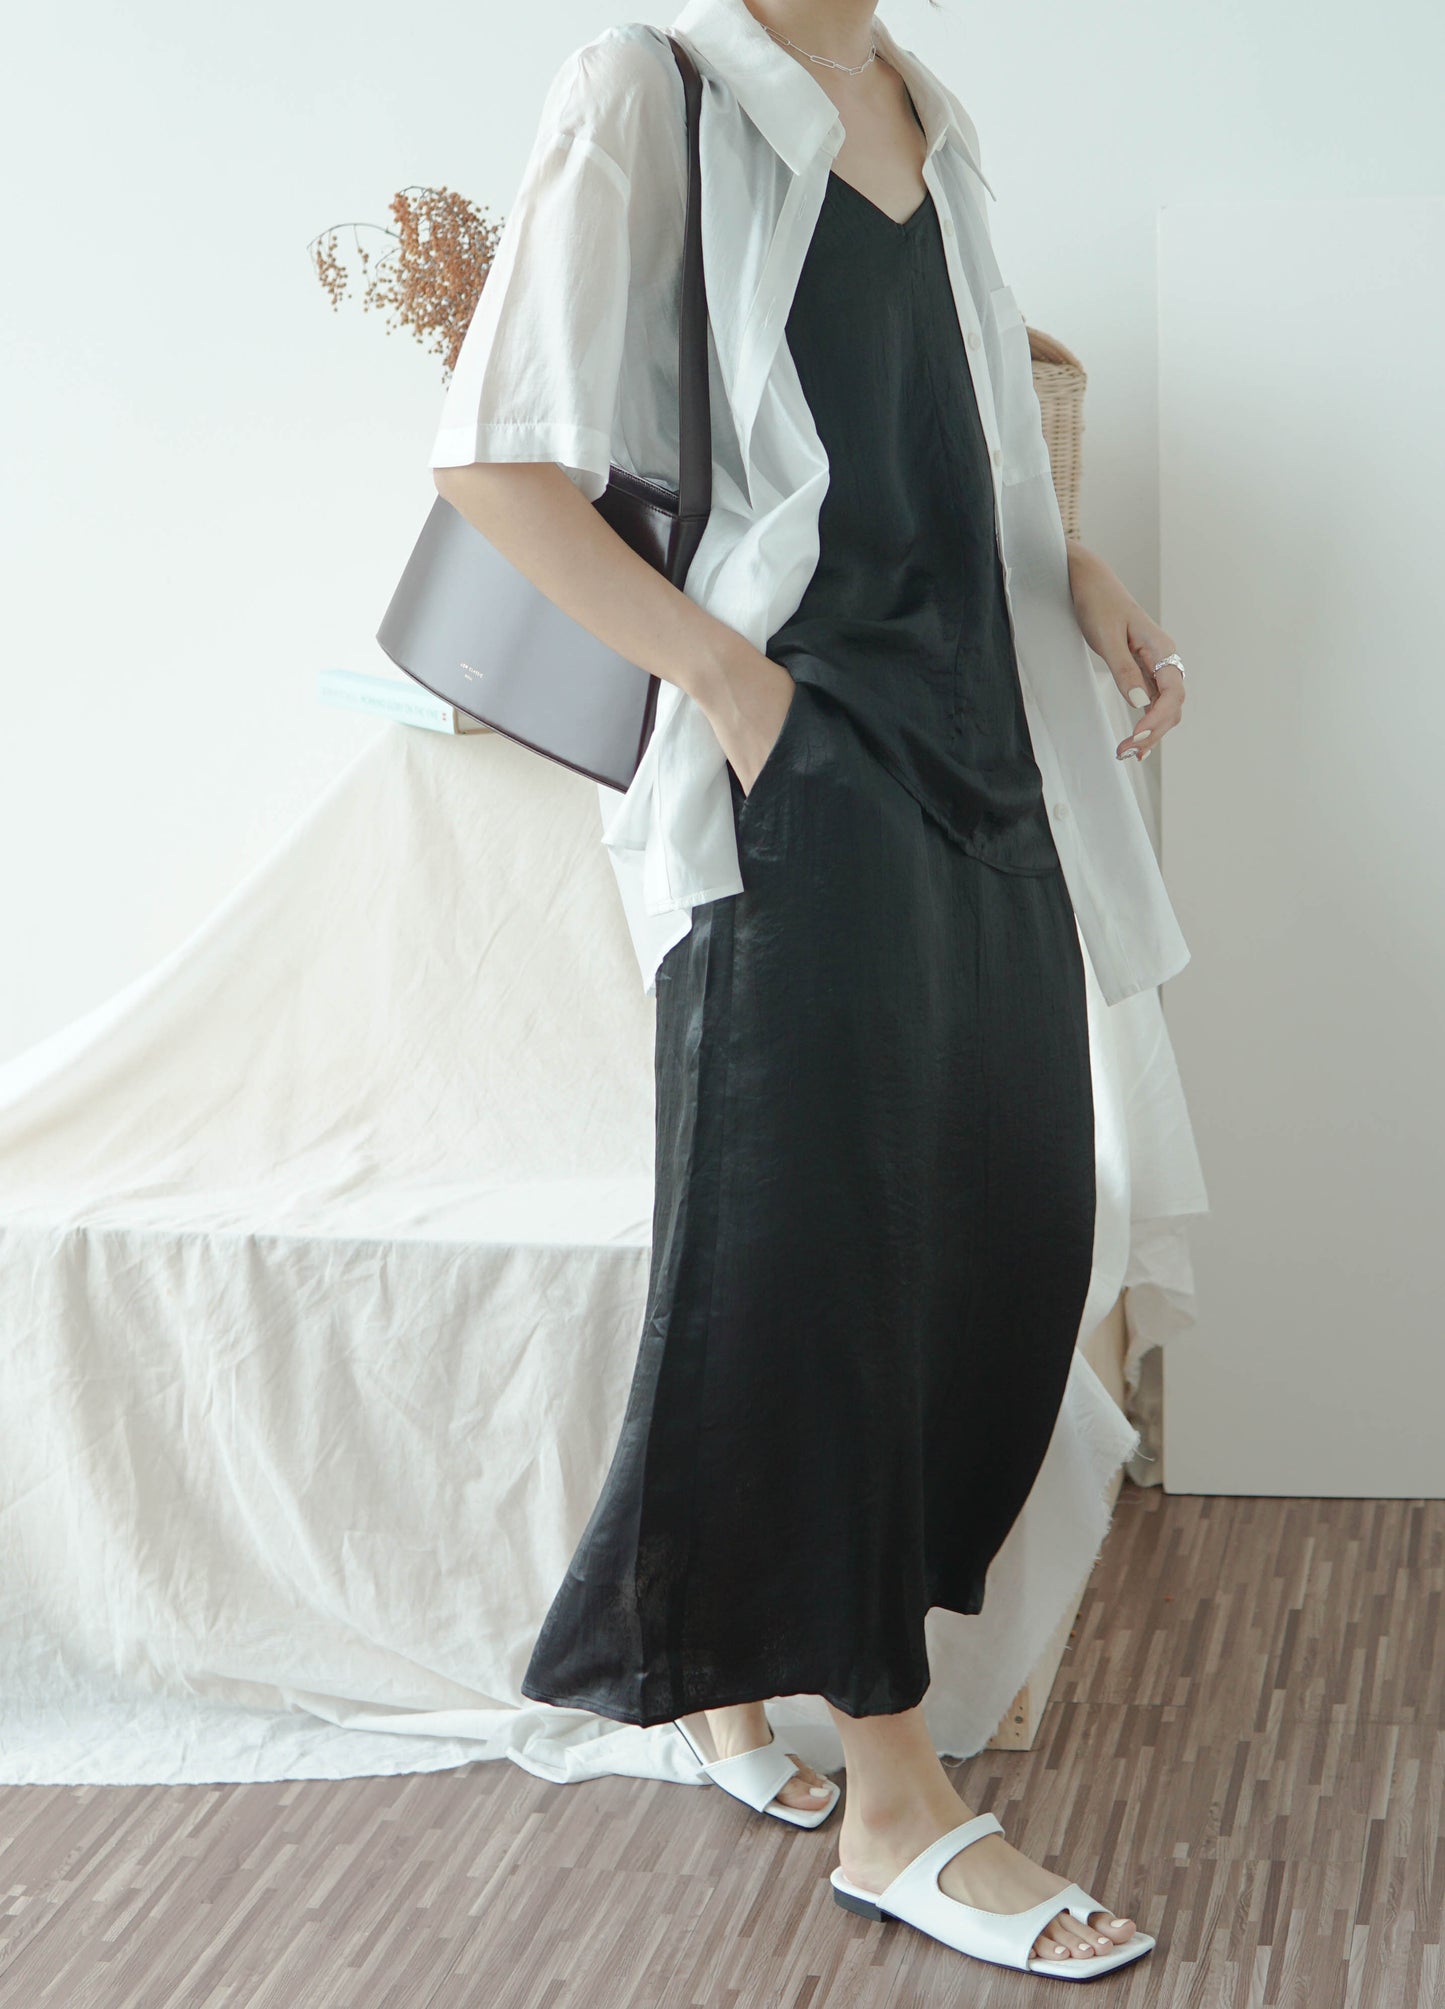 High-waist thin solid color skirt A-line skirt in classic black